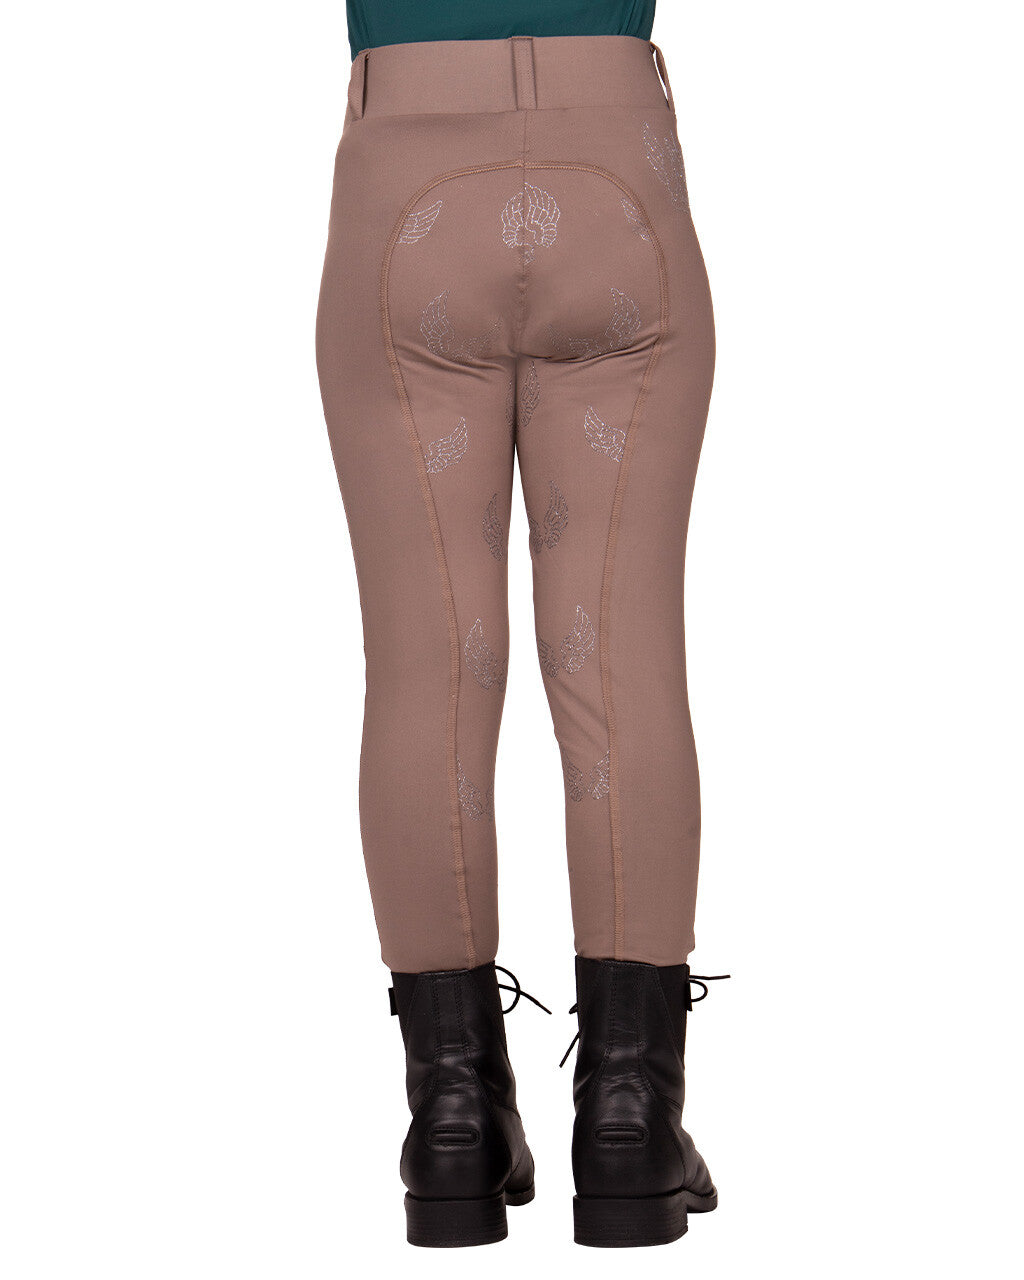 Riding tights - Veerle